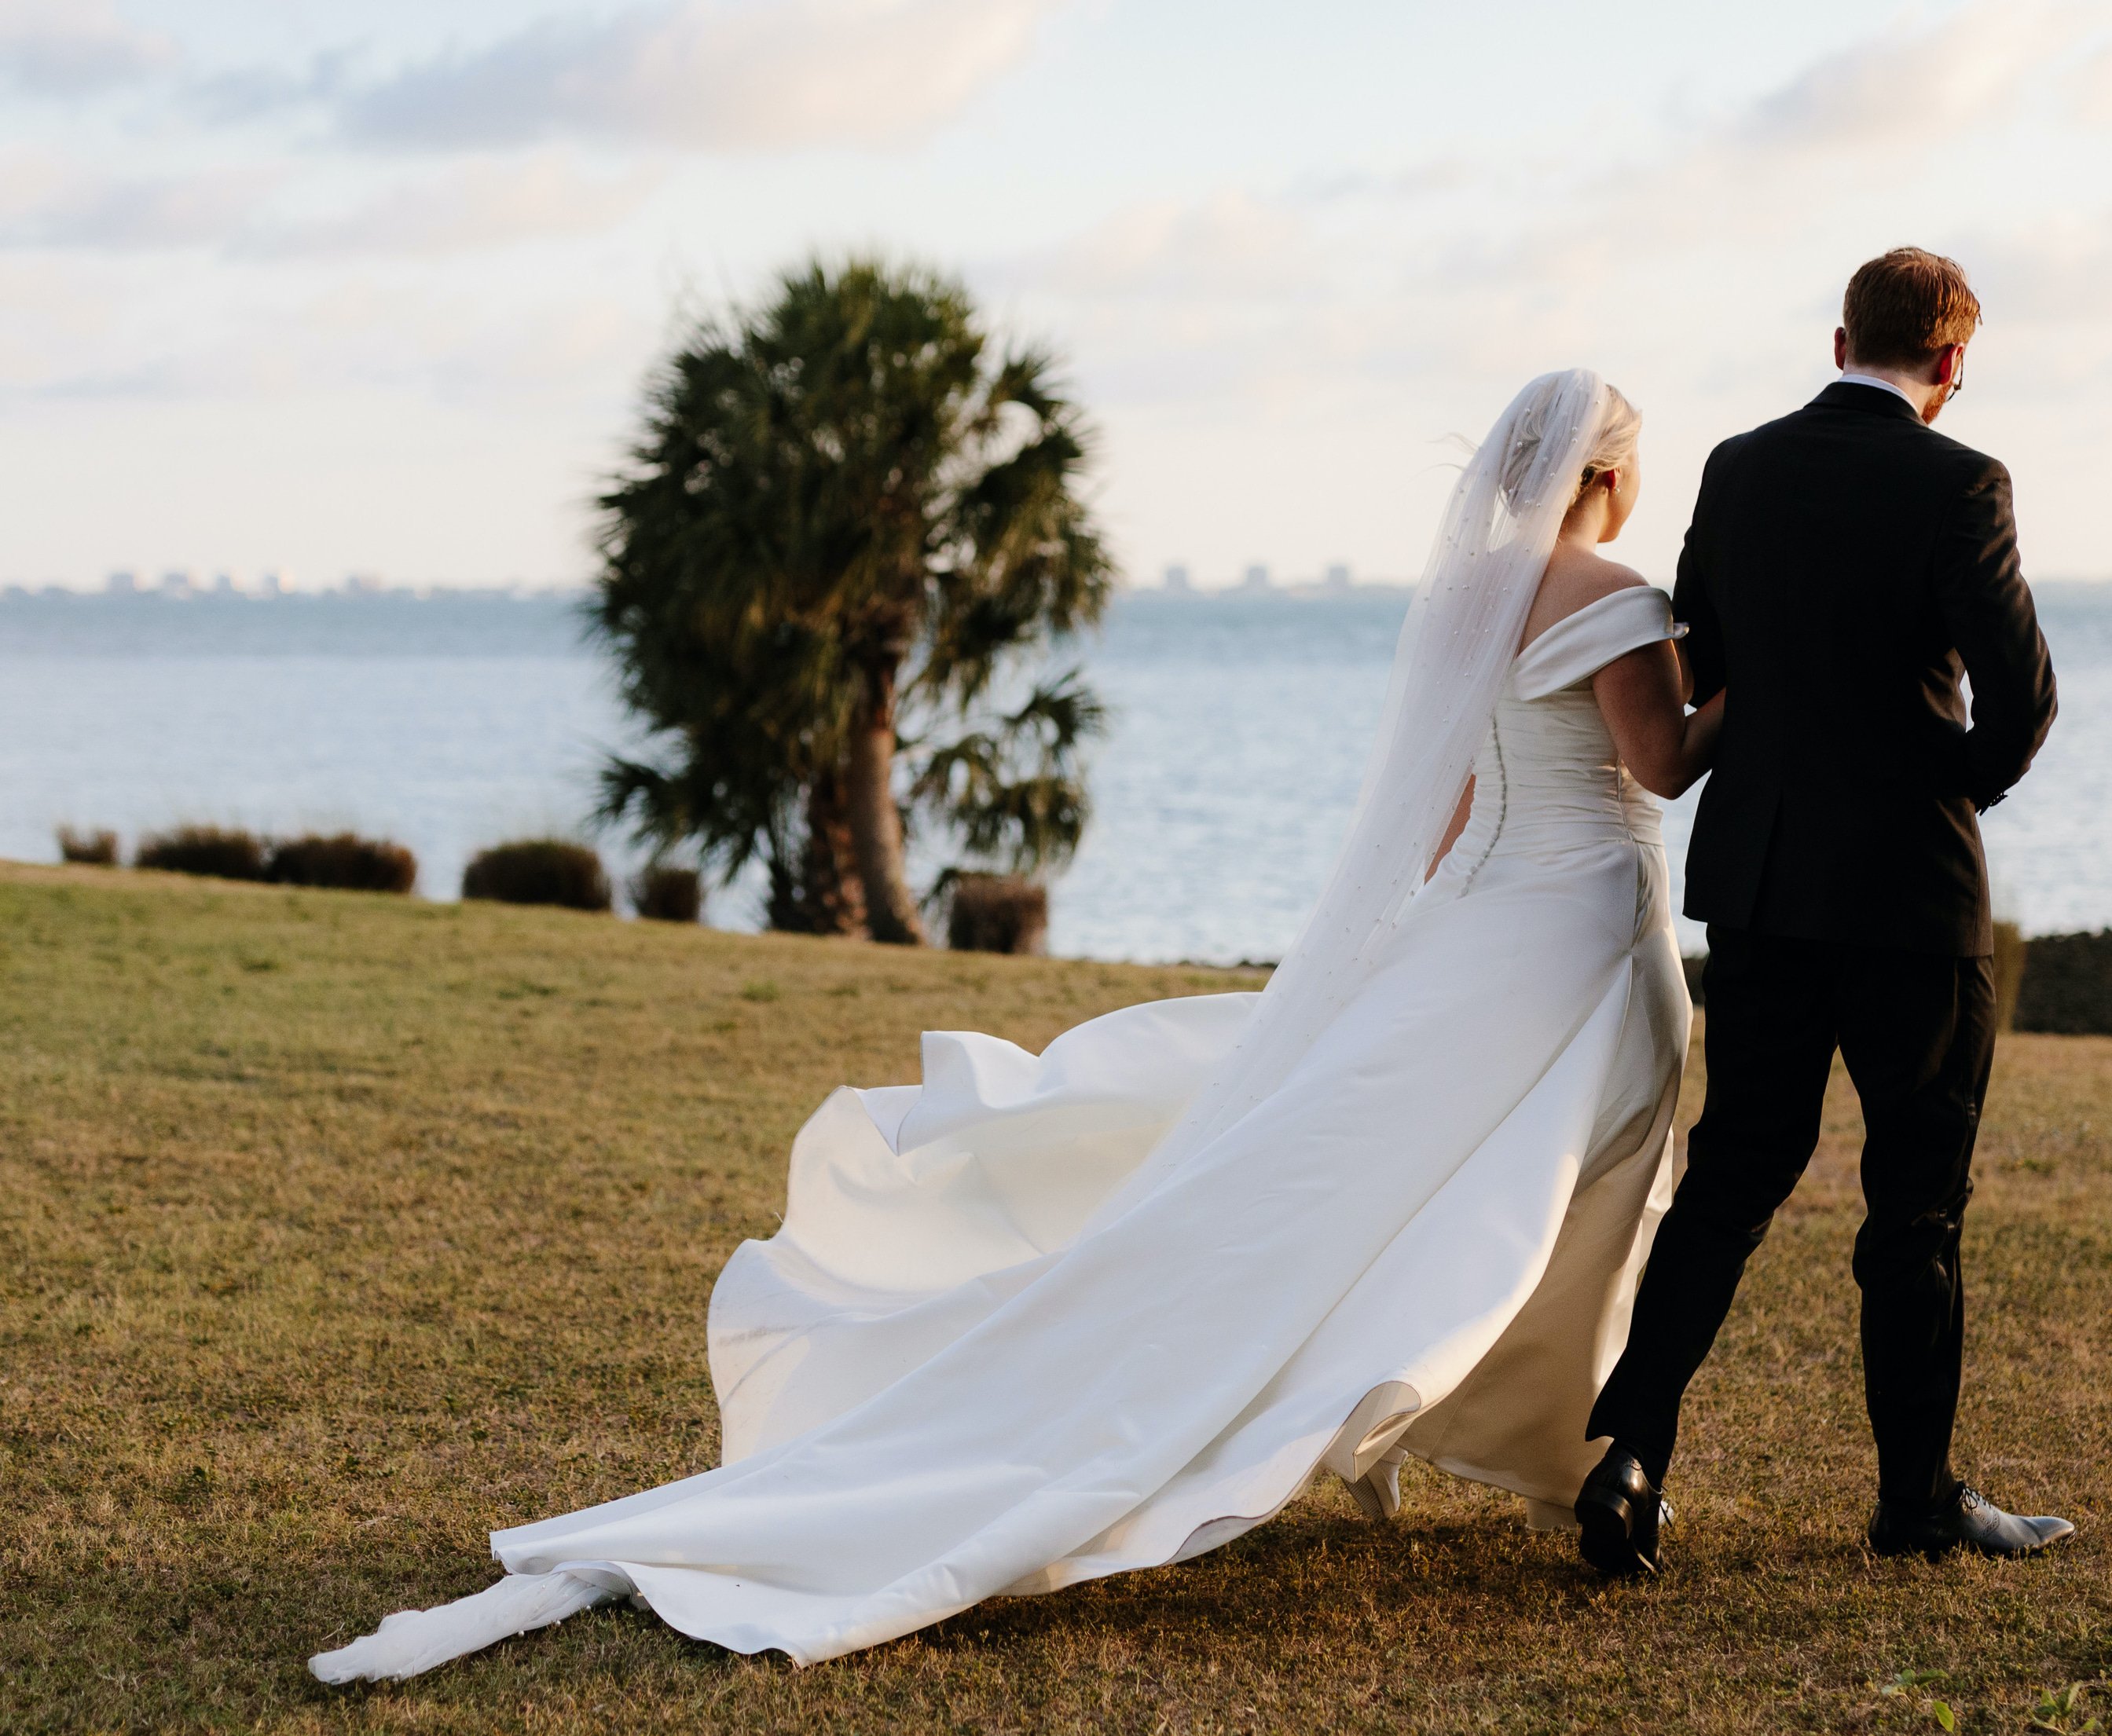 A bride and groom walk on a lawn overlooking Sarasota Bay in Florida during their intimate alfresco summer wedding.